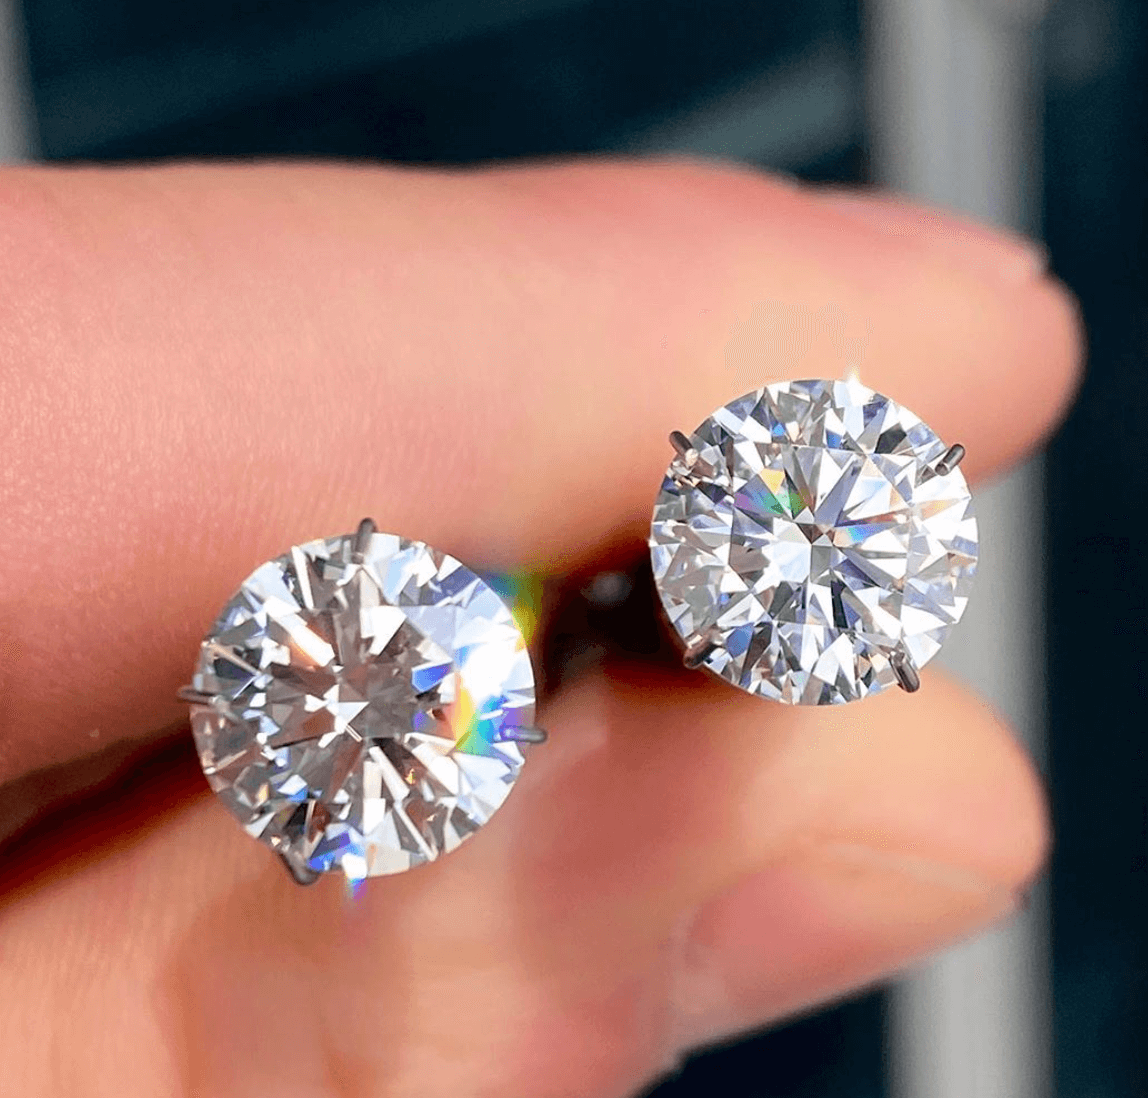 5 Differences Between Moissanite and Diamond